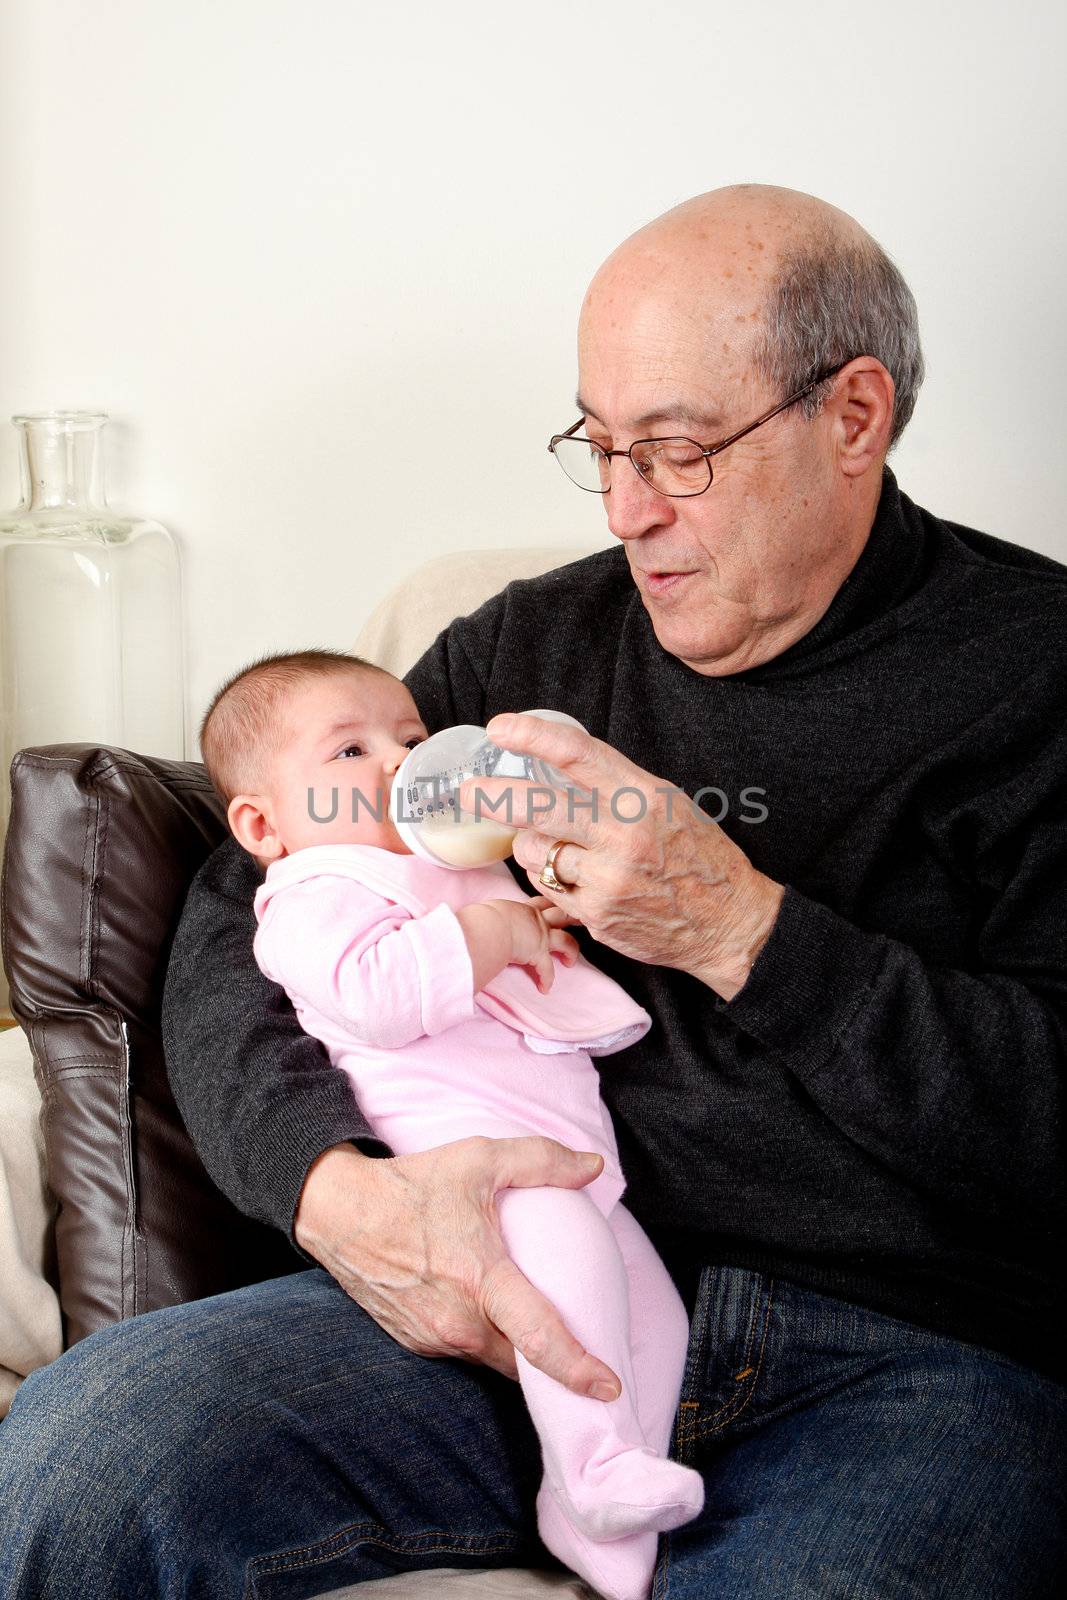 Caucasian Hispanic Grandfather feeding cute baby girl with a bottle of milk while sitting on a couch in a livingroom holding infant in his arms.